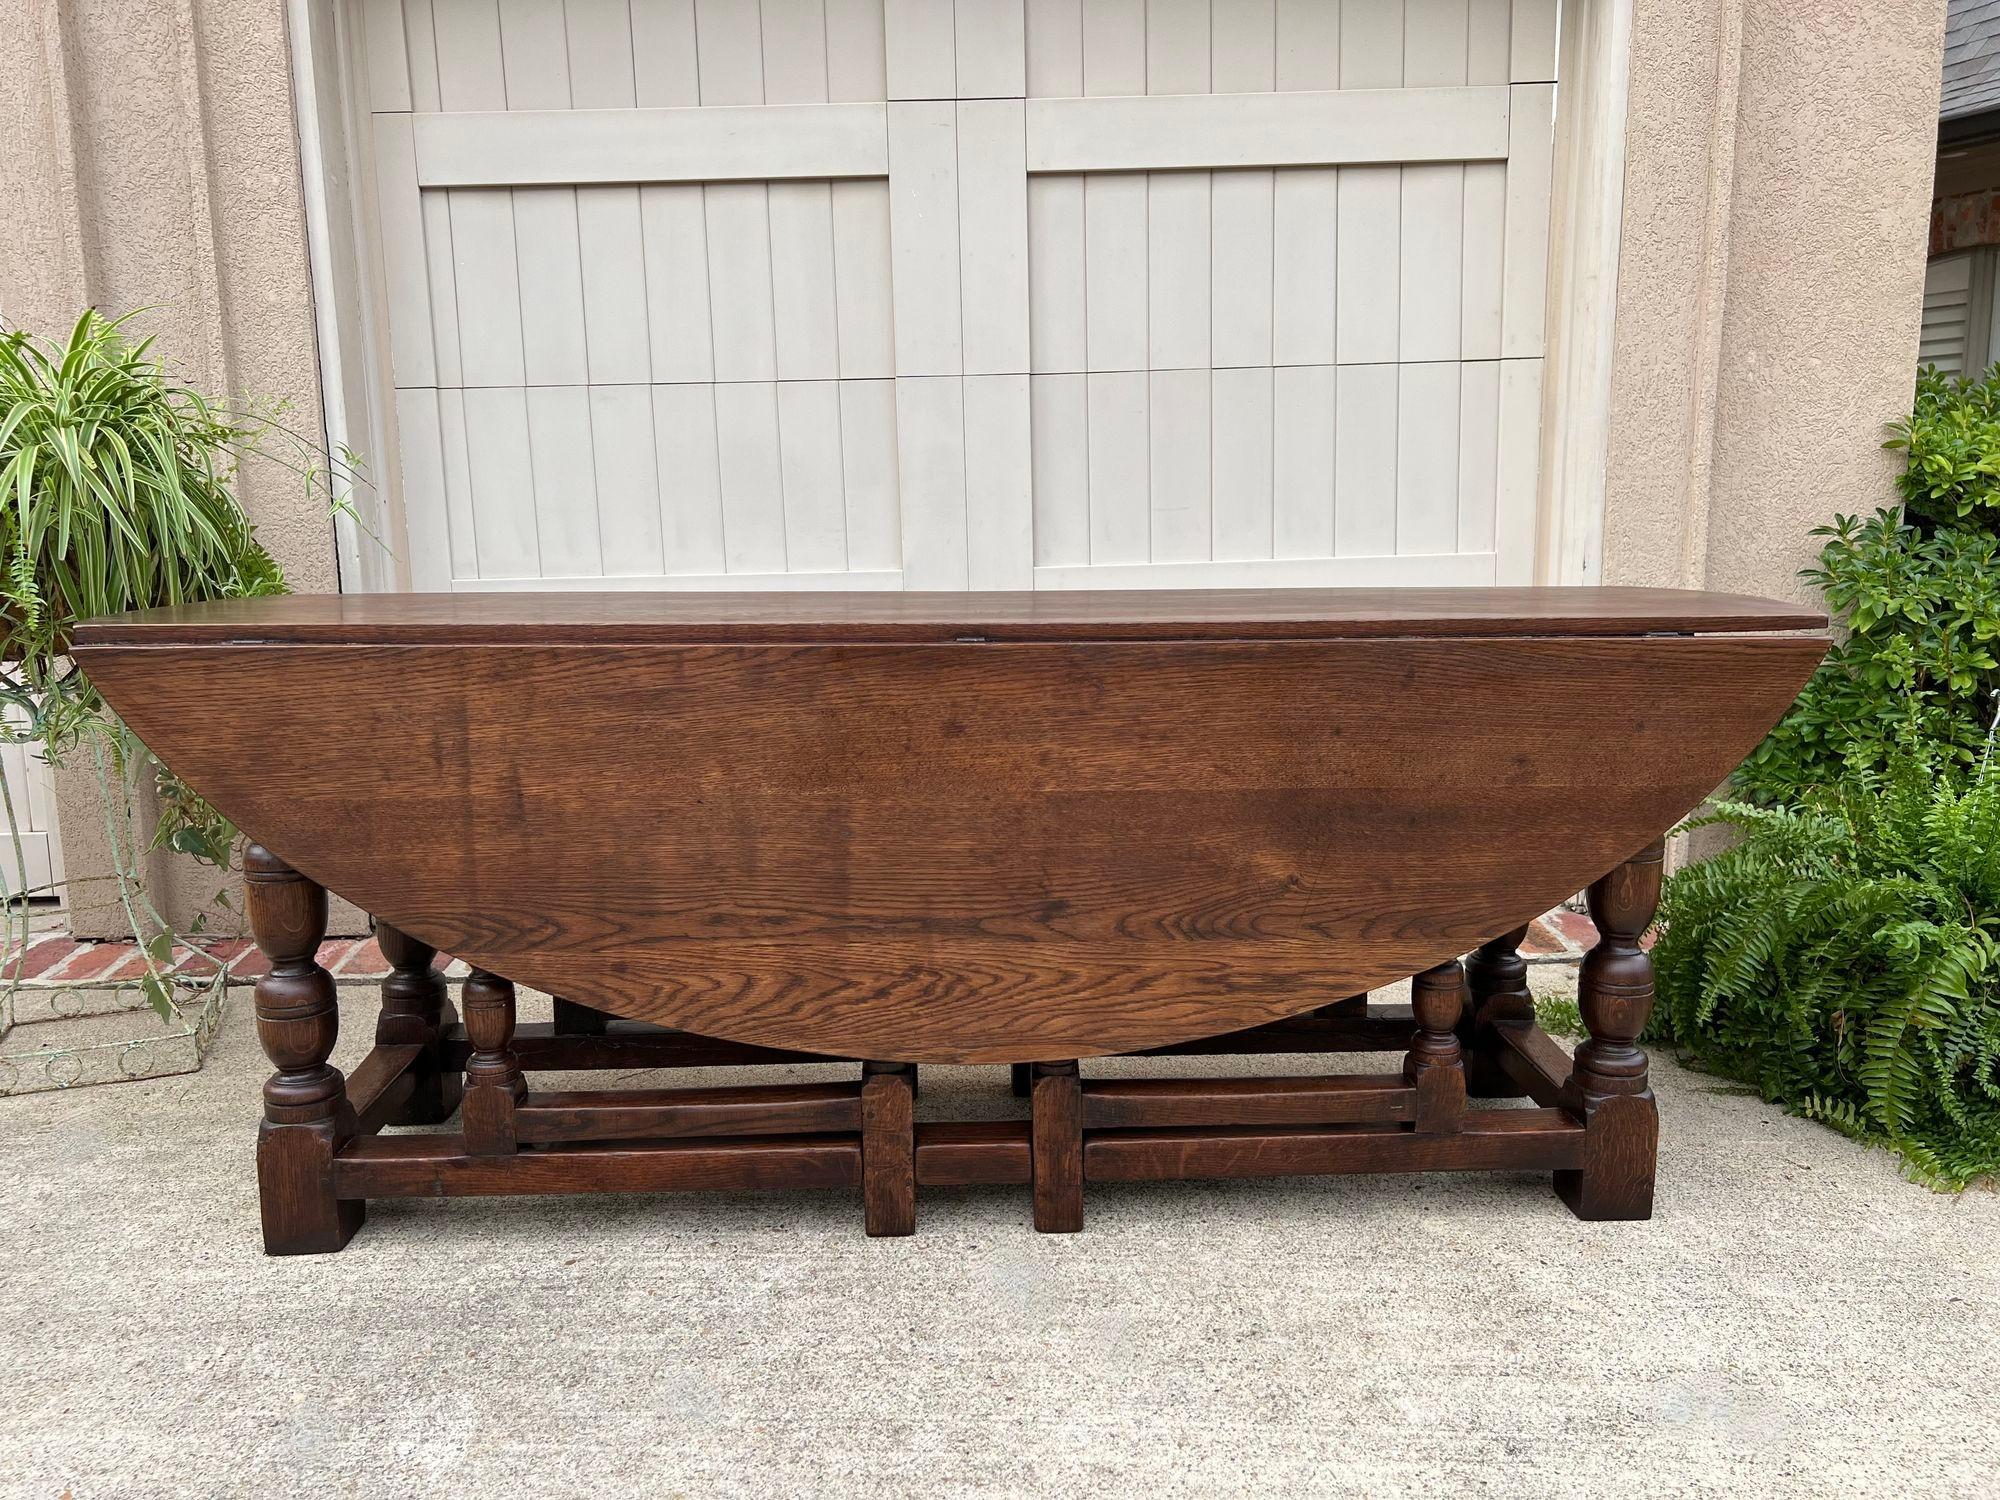 Antique French Hunt Wake Dining Table Oak Drop Leaf Gate Leg LARGE Kitchen.

Direct from France, and one of our customer’s most sought-after table designs, a HUGE, drop leaf, gate leg “wake” or “hunt” table.
The design of these tables makes them so